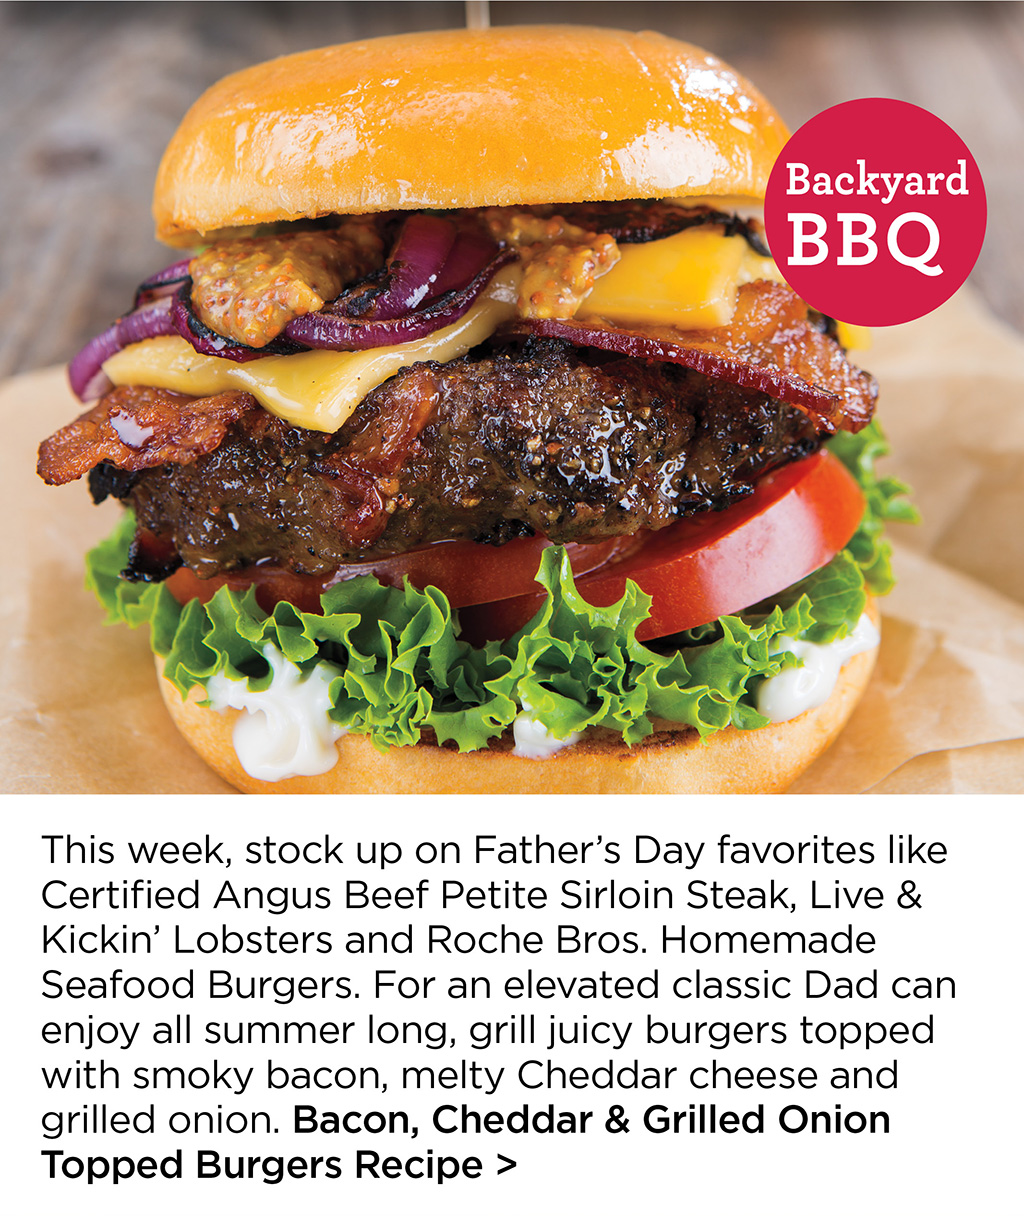 This week, stock up on Father's Day favorites like Certified Angus Beef Petite Sirloin Steak, Live & Kickin' Lobsters and Roche Bros. Homemade Seafood Burgers. For an elevated classic Dad can enjoy all summer long, grill juicy burgers topped with smoky bacon, melty Cheddar cheese and grilled onion. Bacon, Cheddar & Grilled Onion Topped Burgers Recipe >